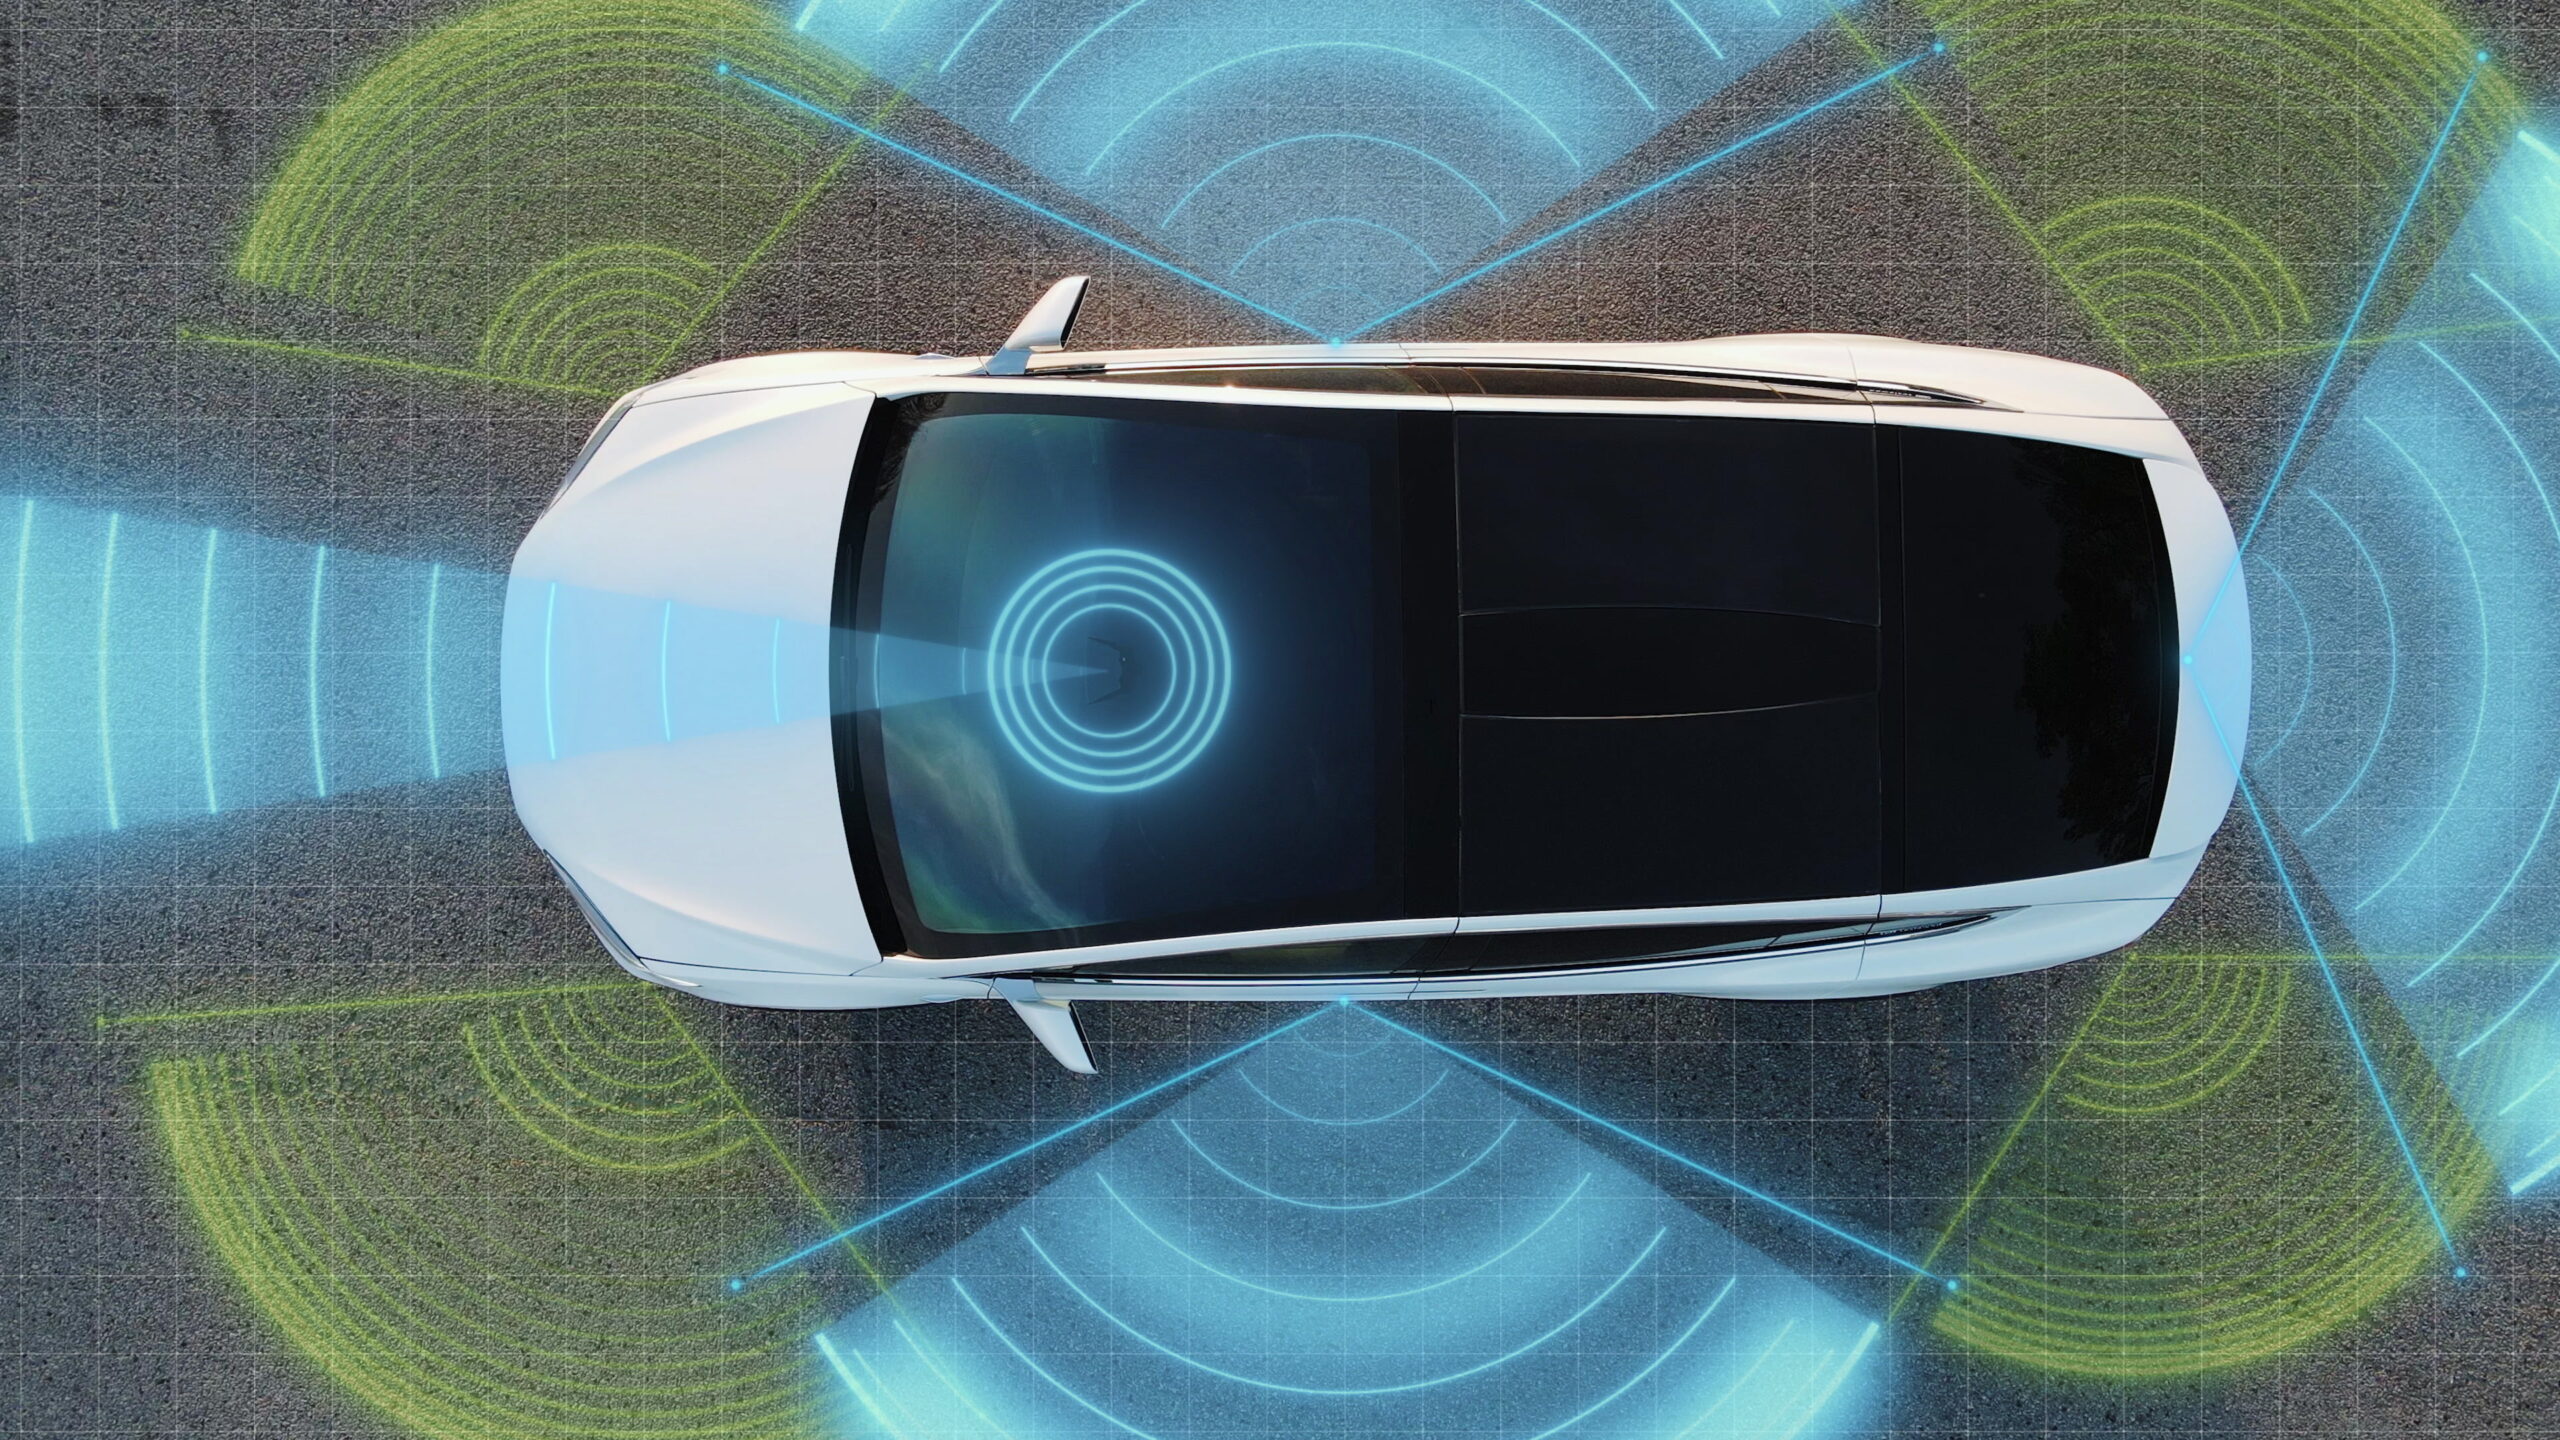 Self-driving autopilot car technology, radar, 360, sensors, cameras, lasers. Artificial intelligence digitizes and analyzes roads. Sensors scan ahead for vehicles, hazards and speed limits